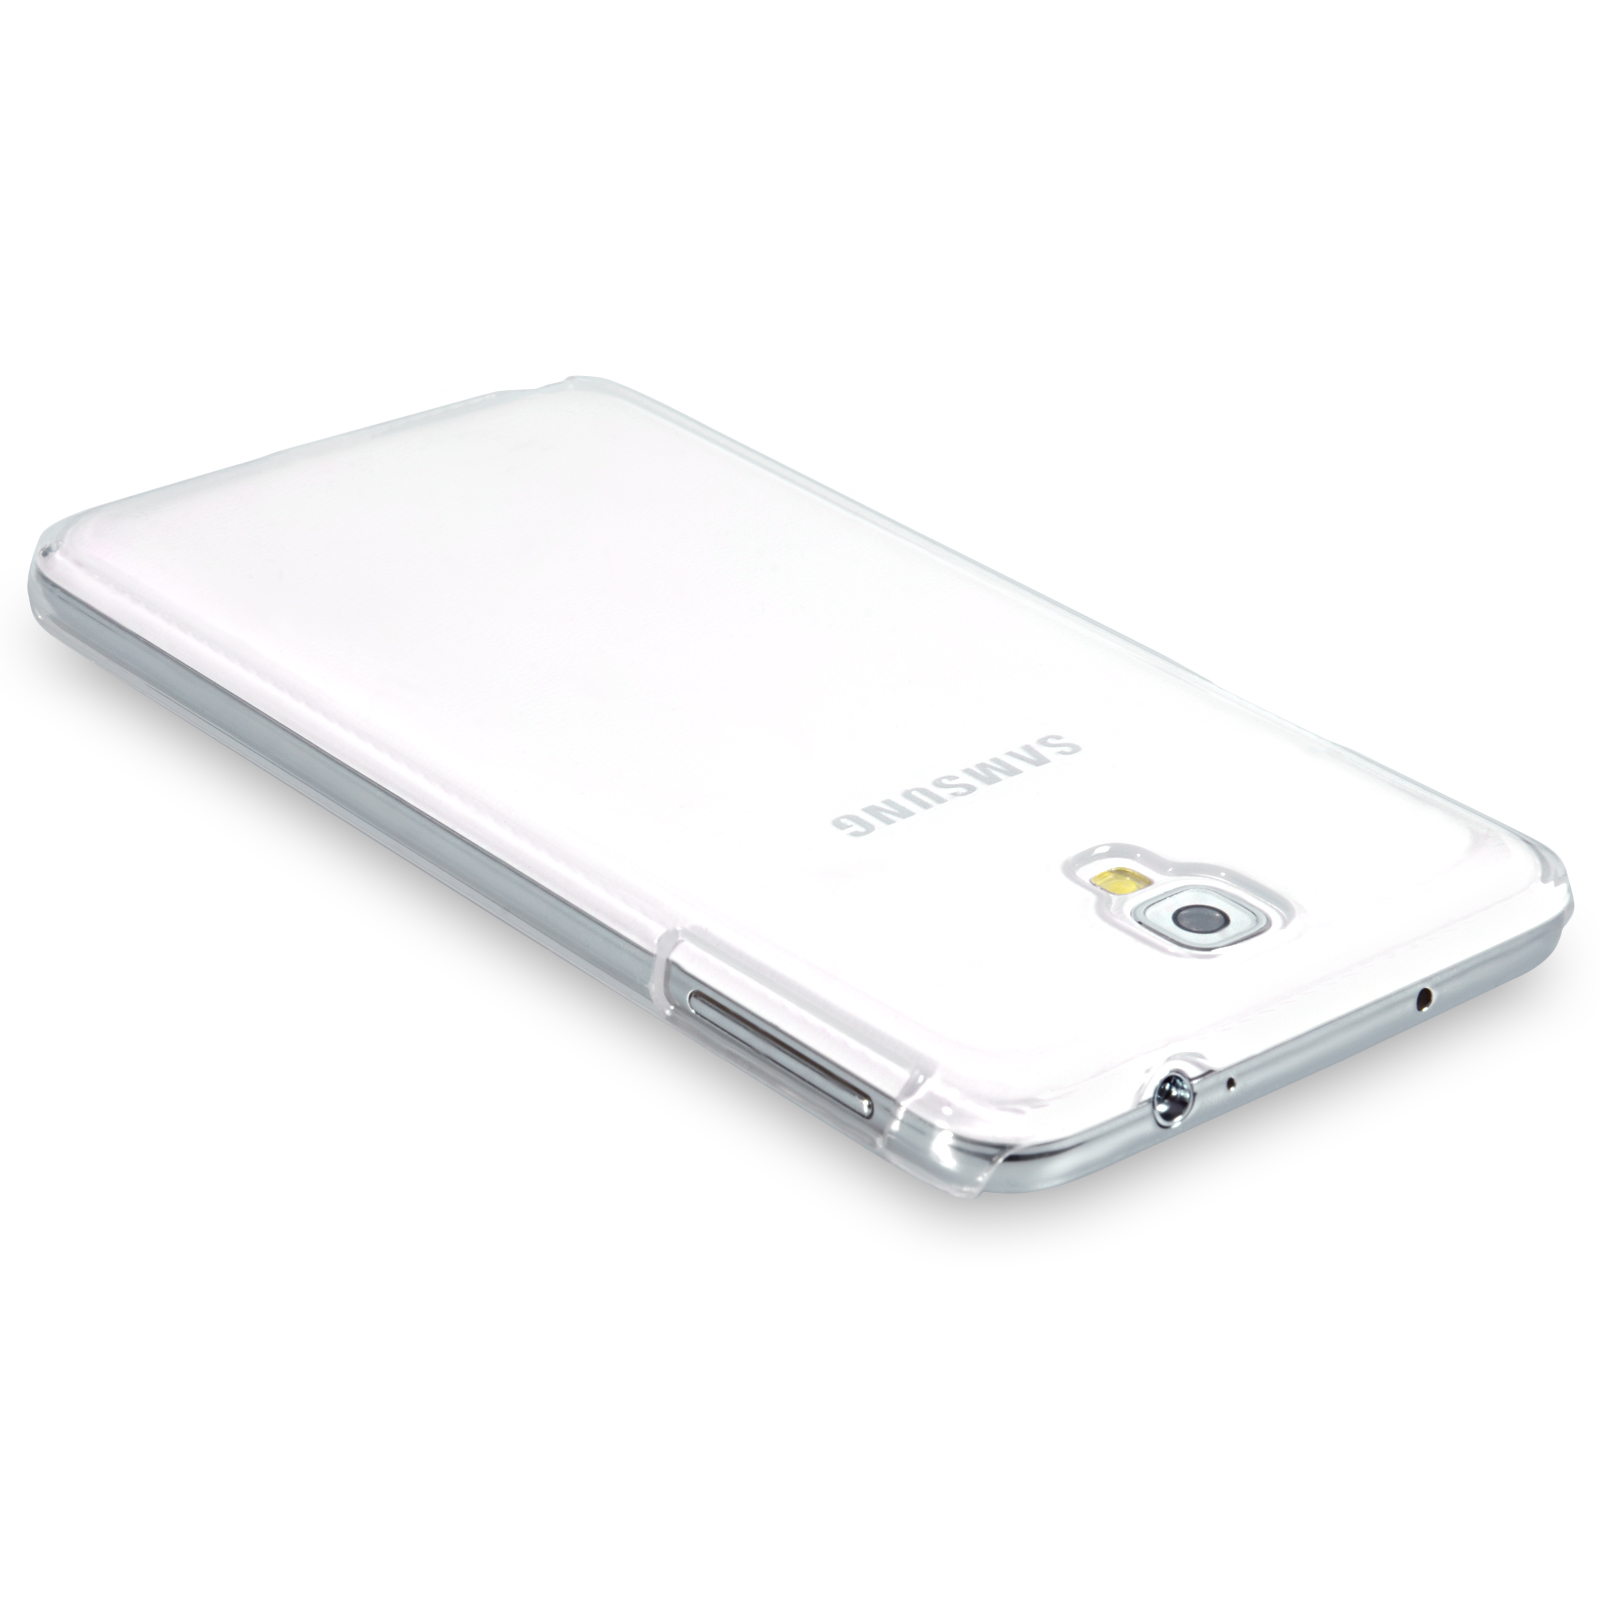 YouSave Samsung Galaxy Note 3 Neo Hard Case - Crystal Clear